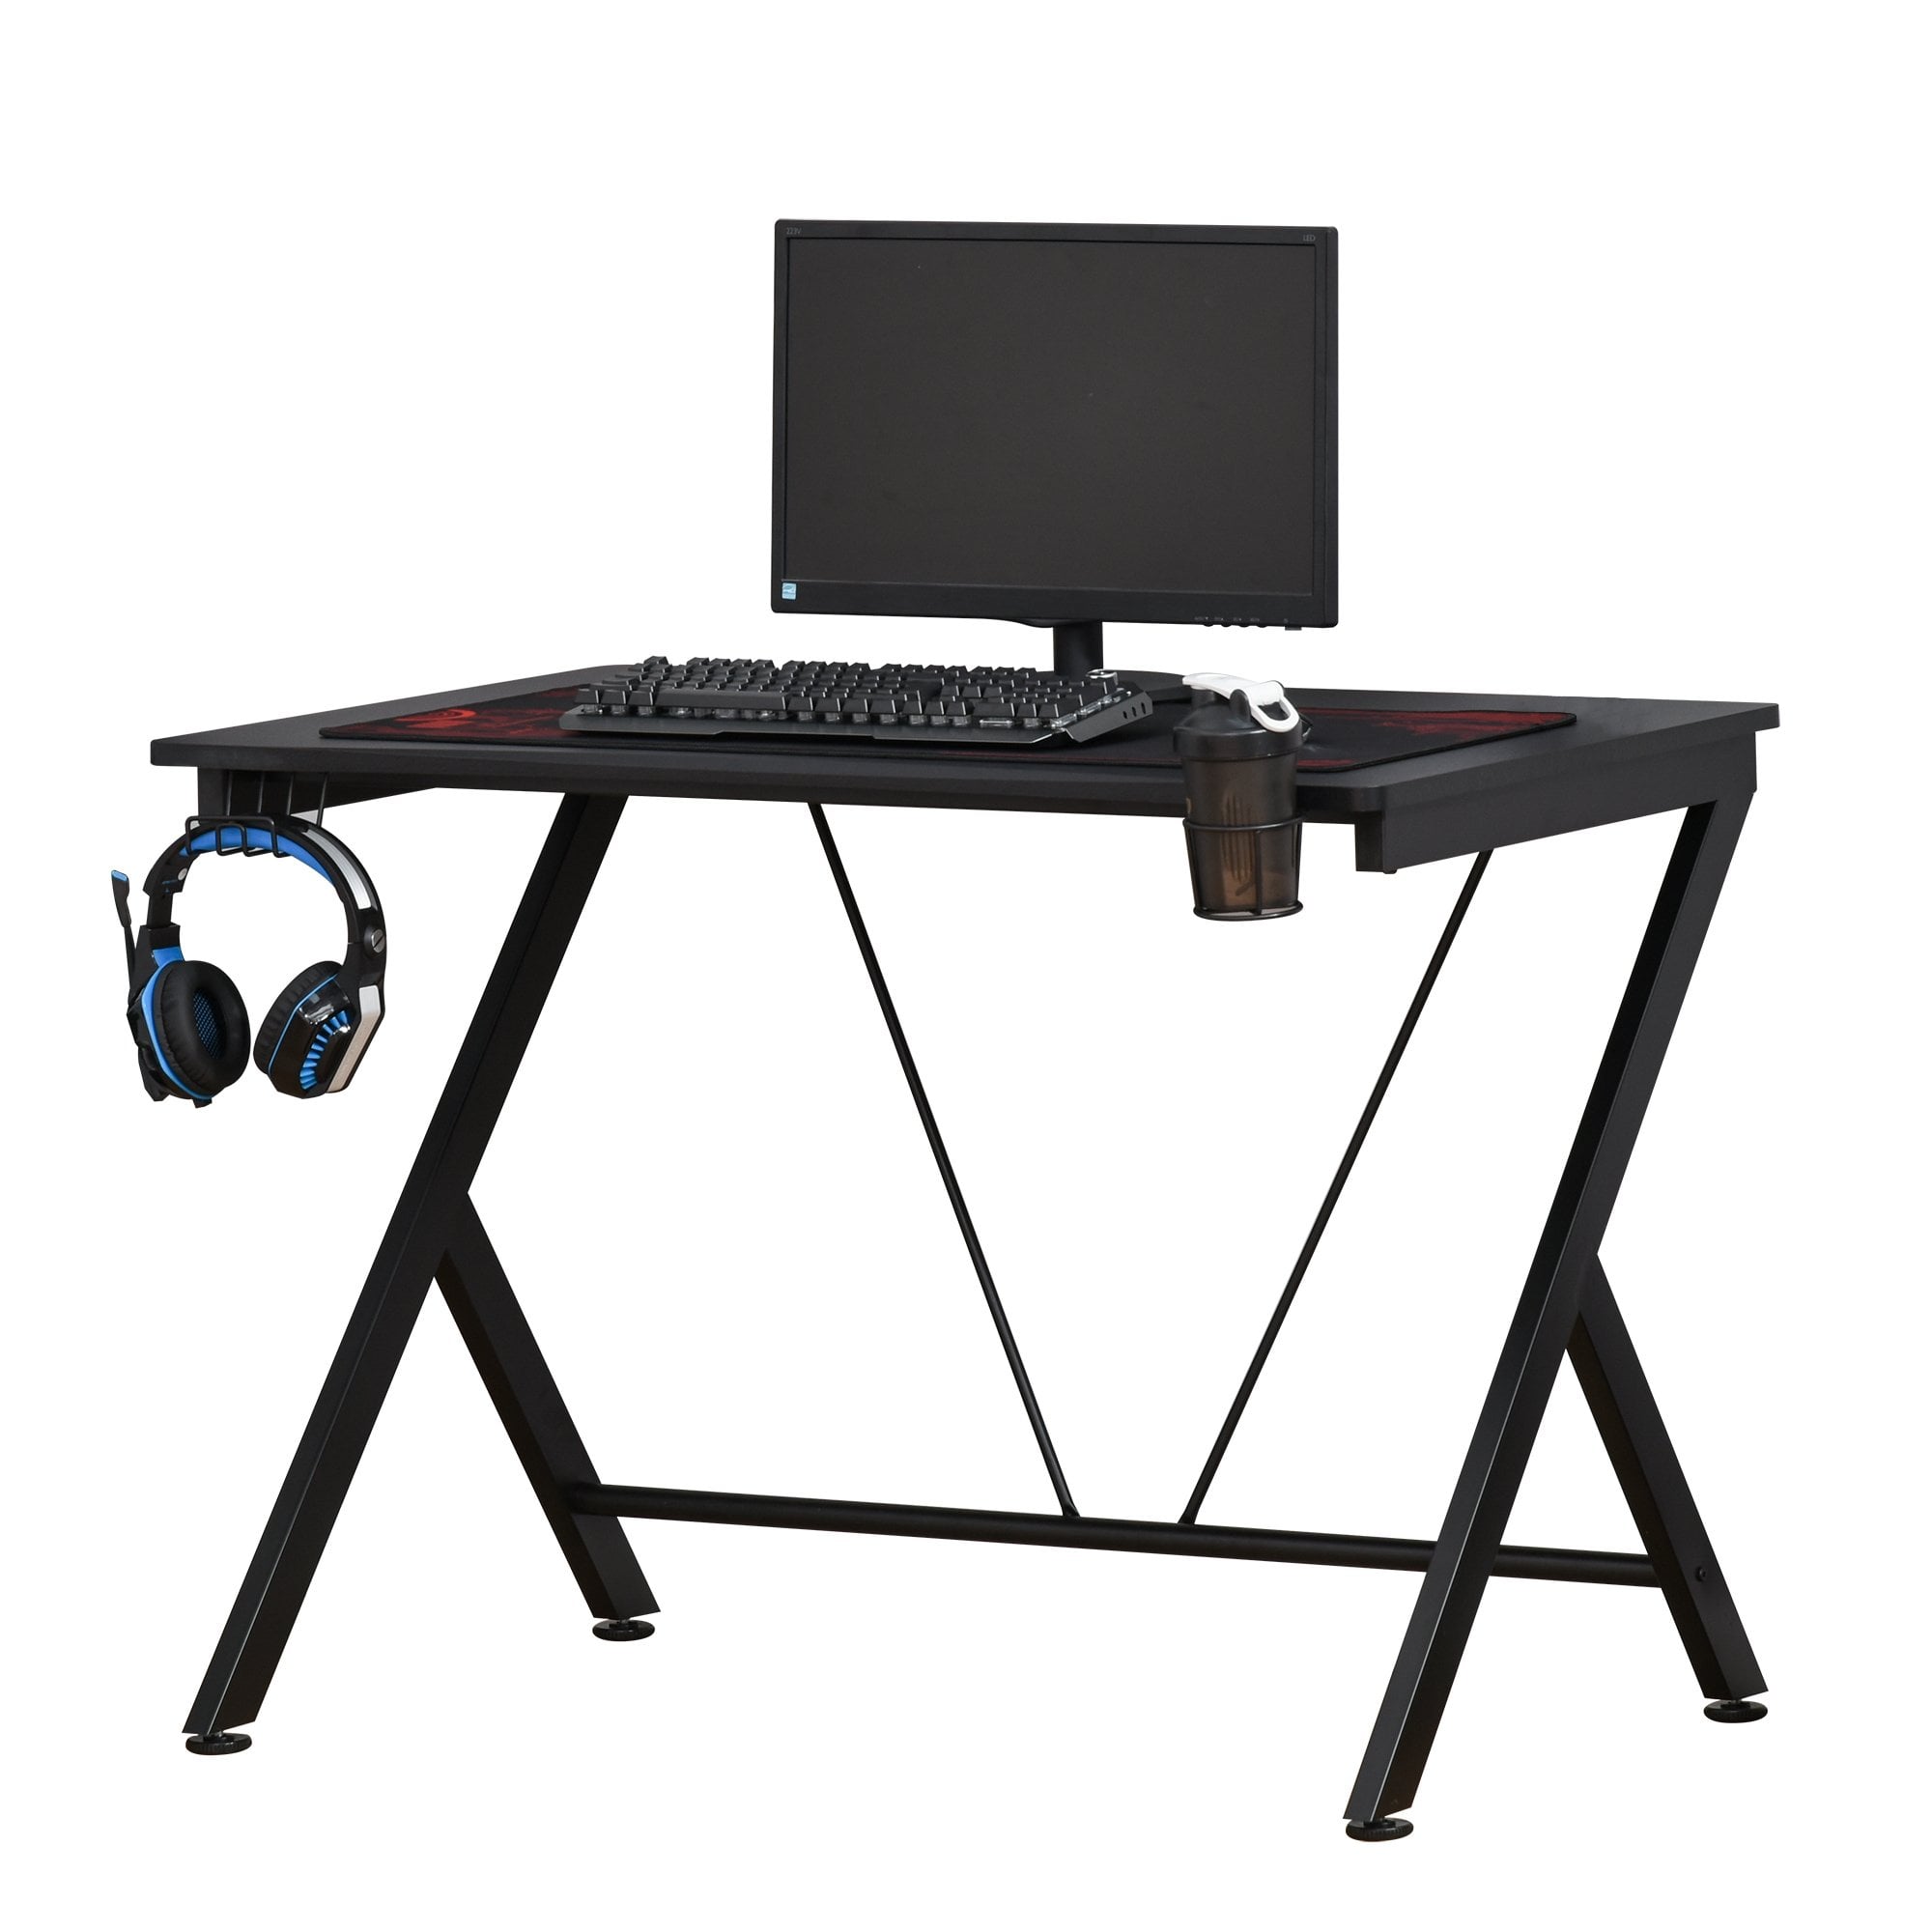 HOMCOM Gaming Desk Computer Table Metal Frame with Cup Holder - Headphone Hook - Cable Hole - Black  | TJ Hughes